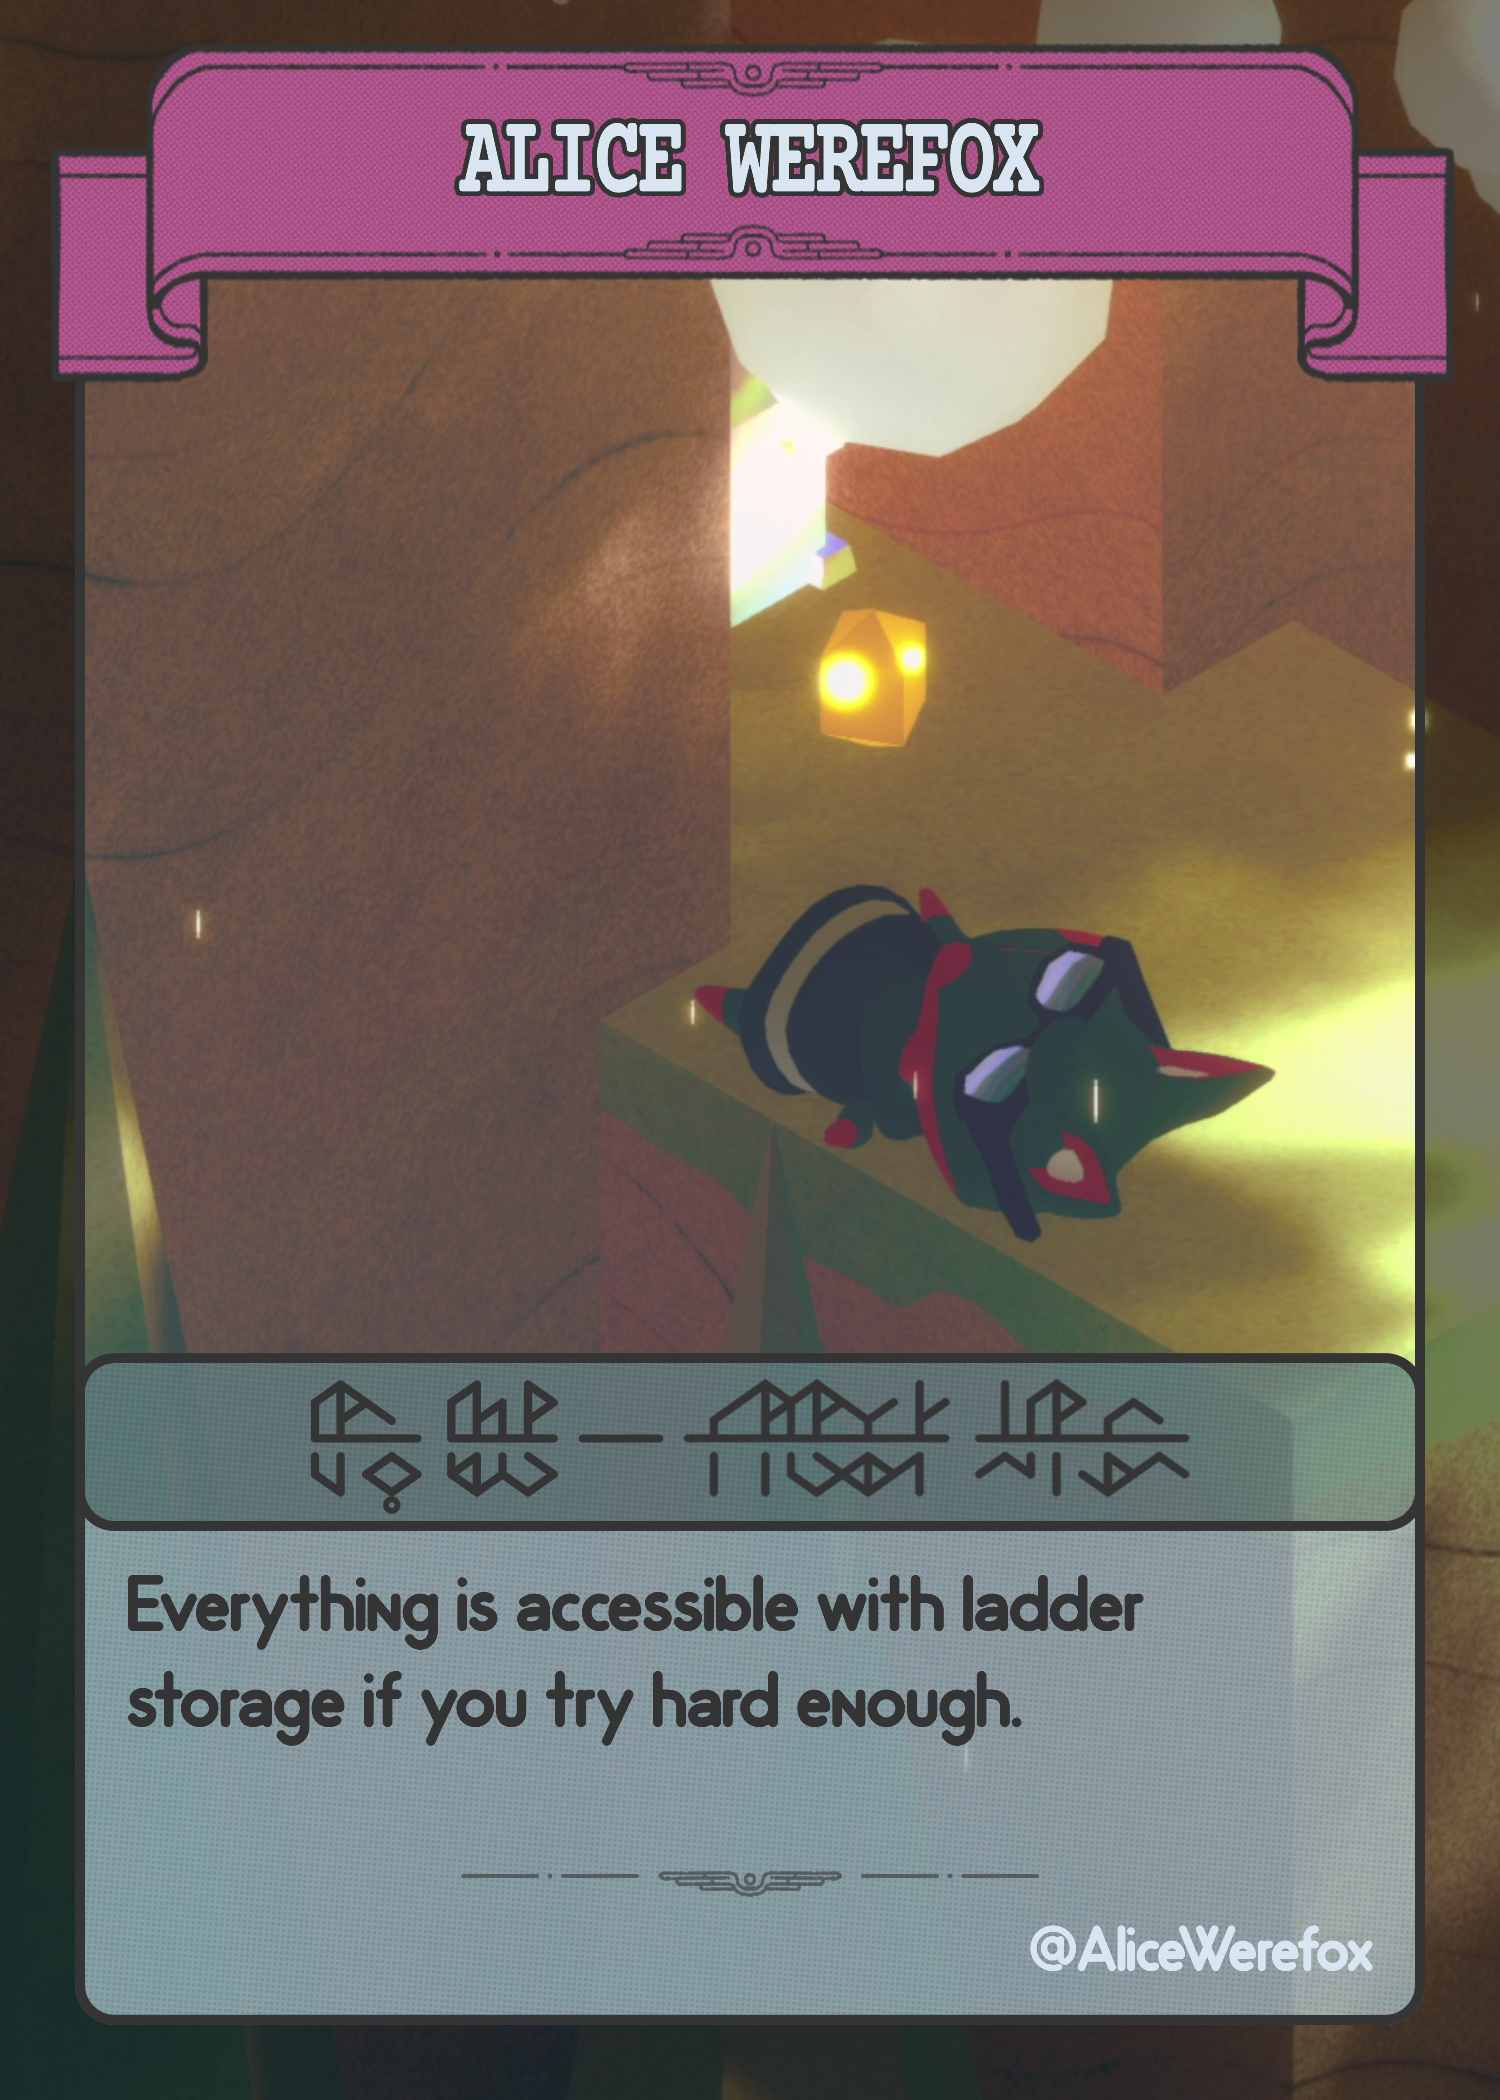 A TUNIC themed trading card for "Alice Werefox," which pictures her character lying on the ground near a chest in a small alcove with text reading: "Everything is accessible with ladder storage if you try hard enough."